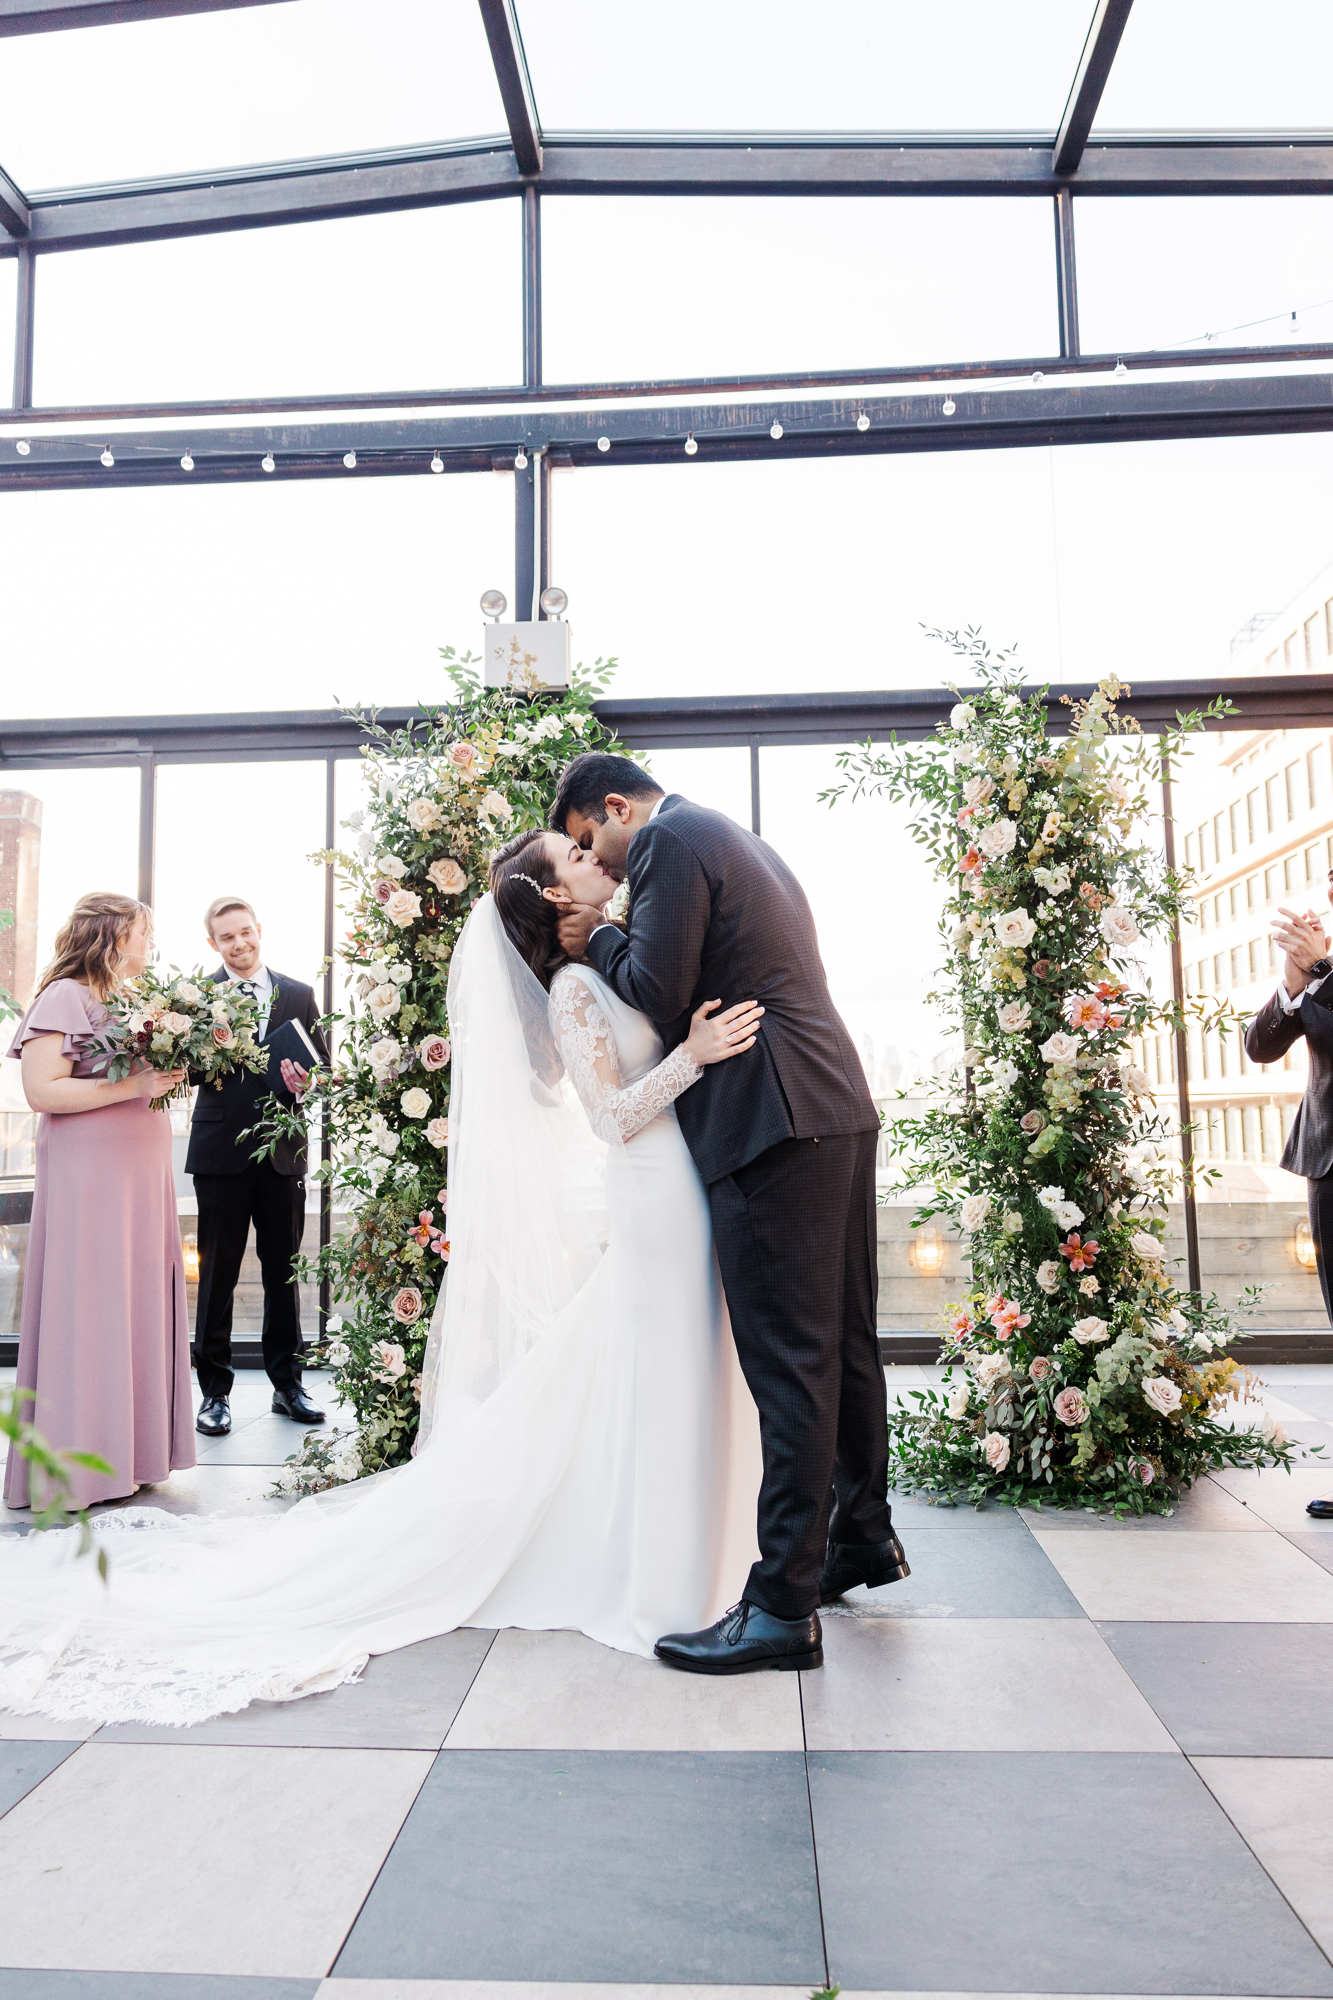 Jaw-Dropping 74Wythe Wedding Photography in Wintery Brooklyn with Rooftop Views